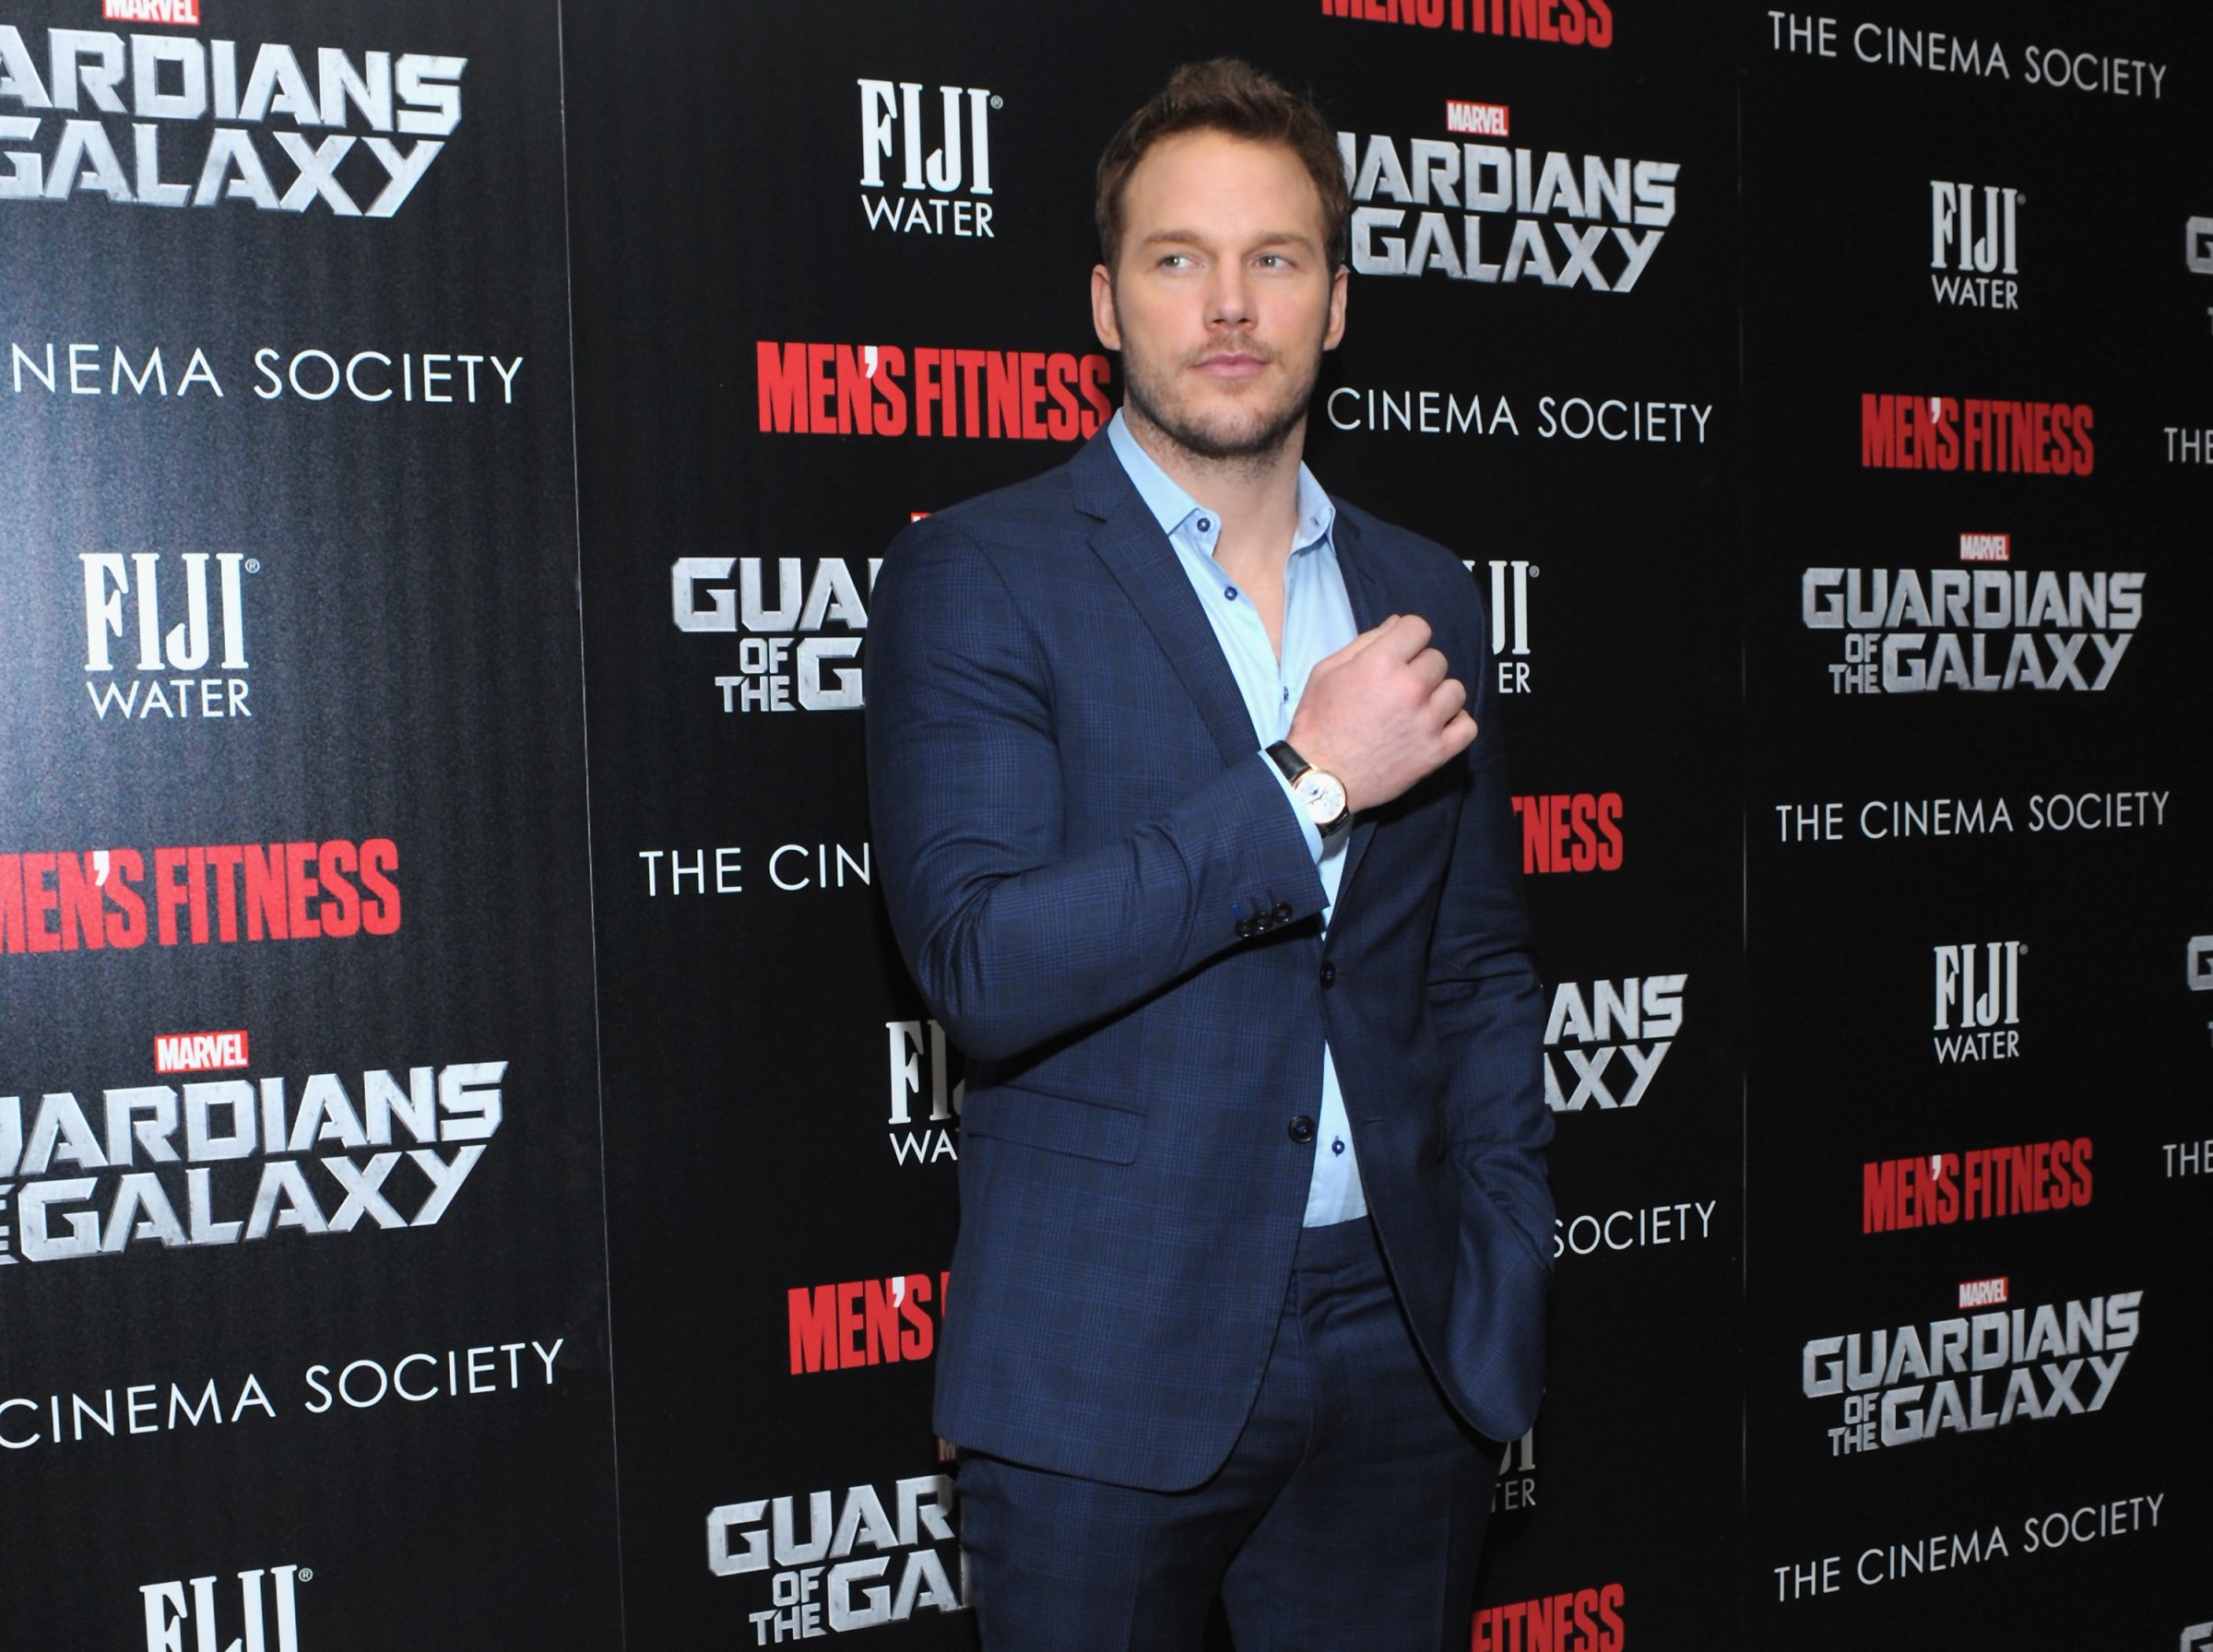 Chris Pratt on the red carpet for "Guardians of the Galaxy"